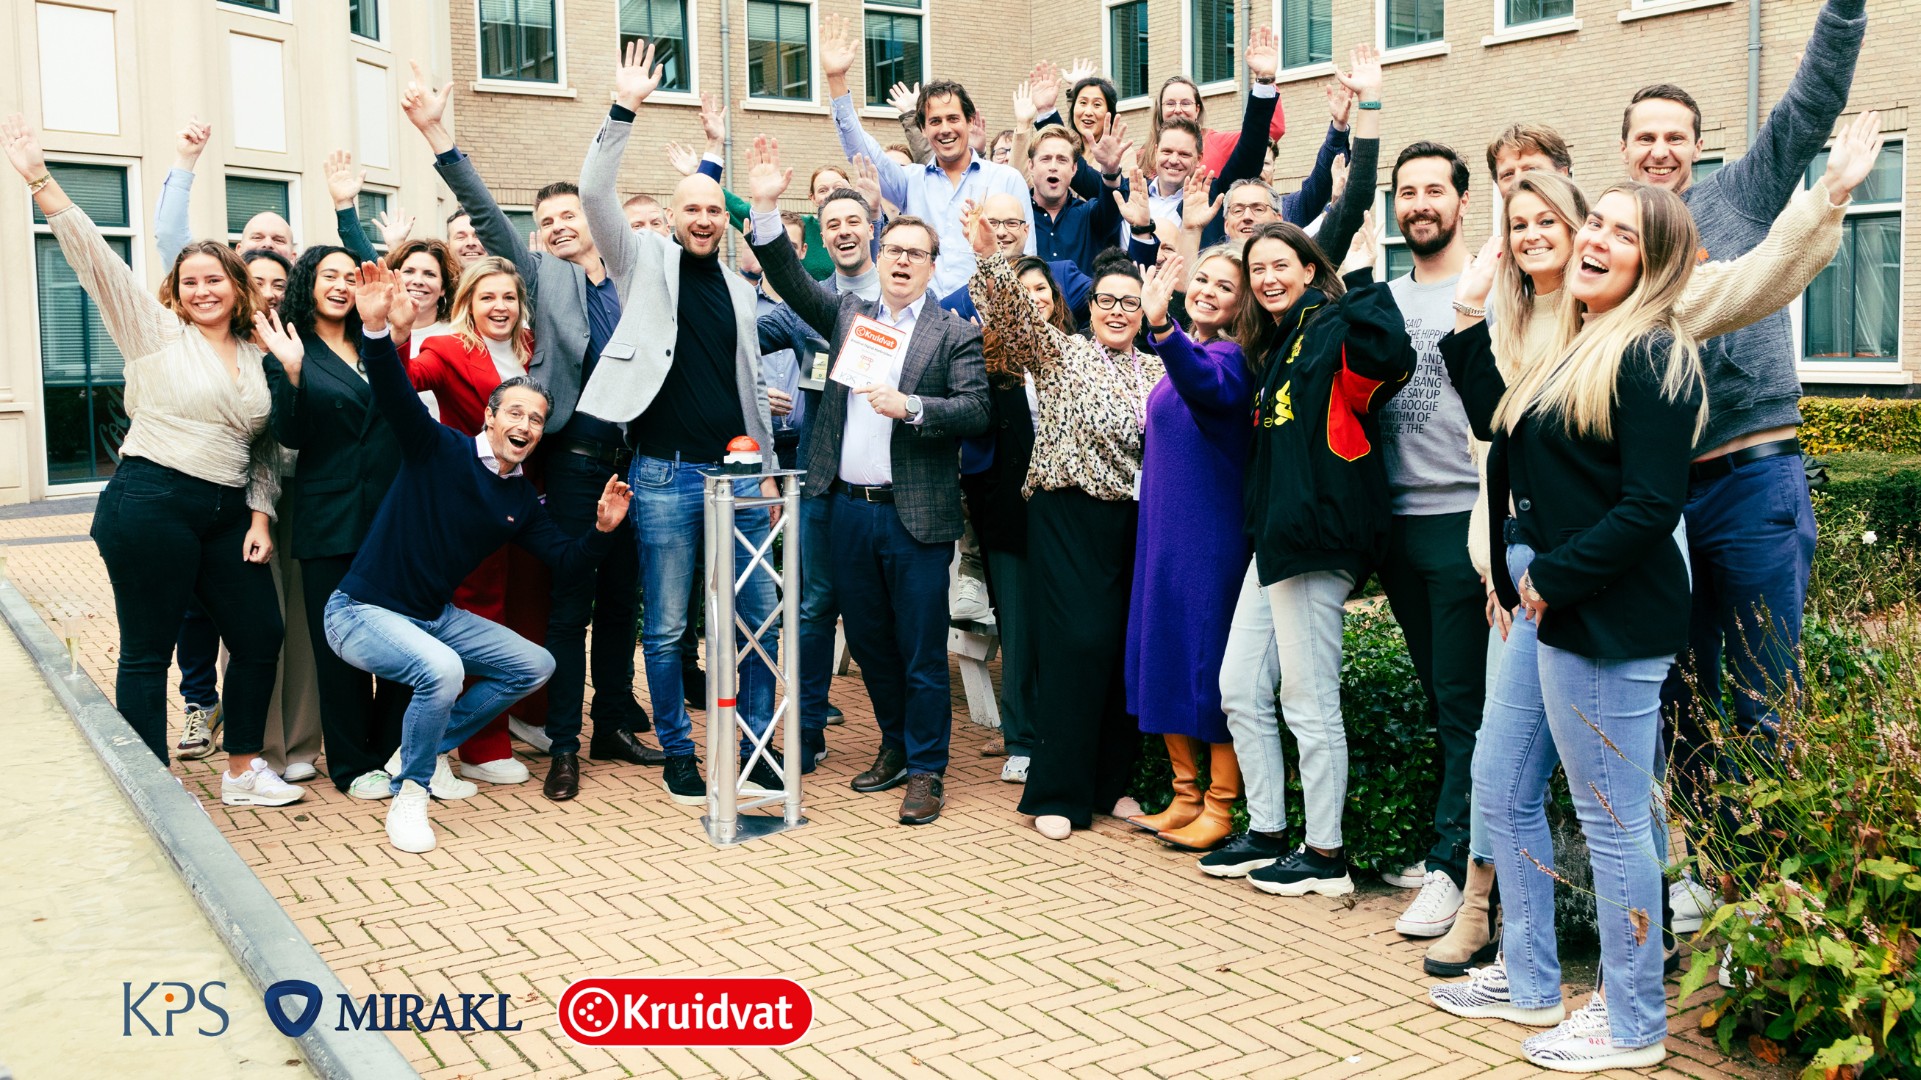 Implementation partner KPS looks together with the Dutch omnichannel retailer Kruidvat on a successful go-live of the Kruidvat Marketplace